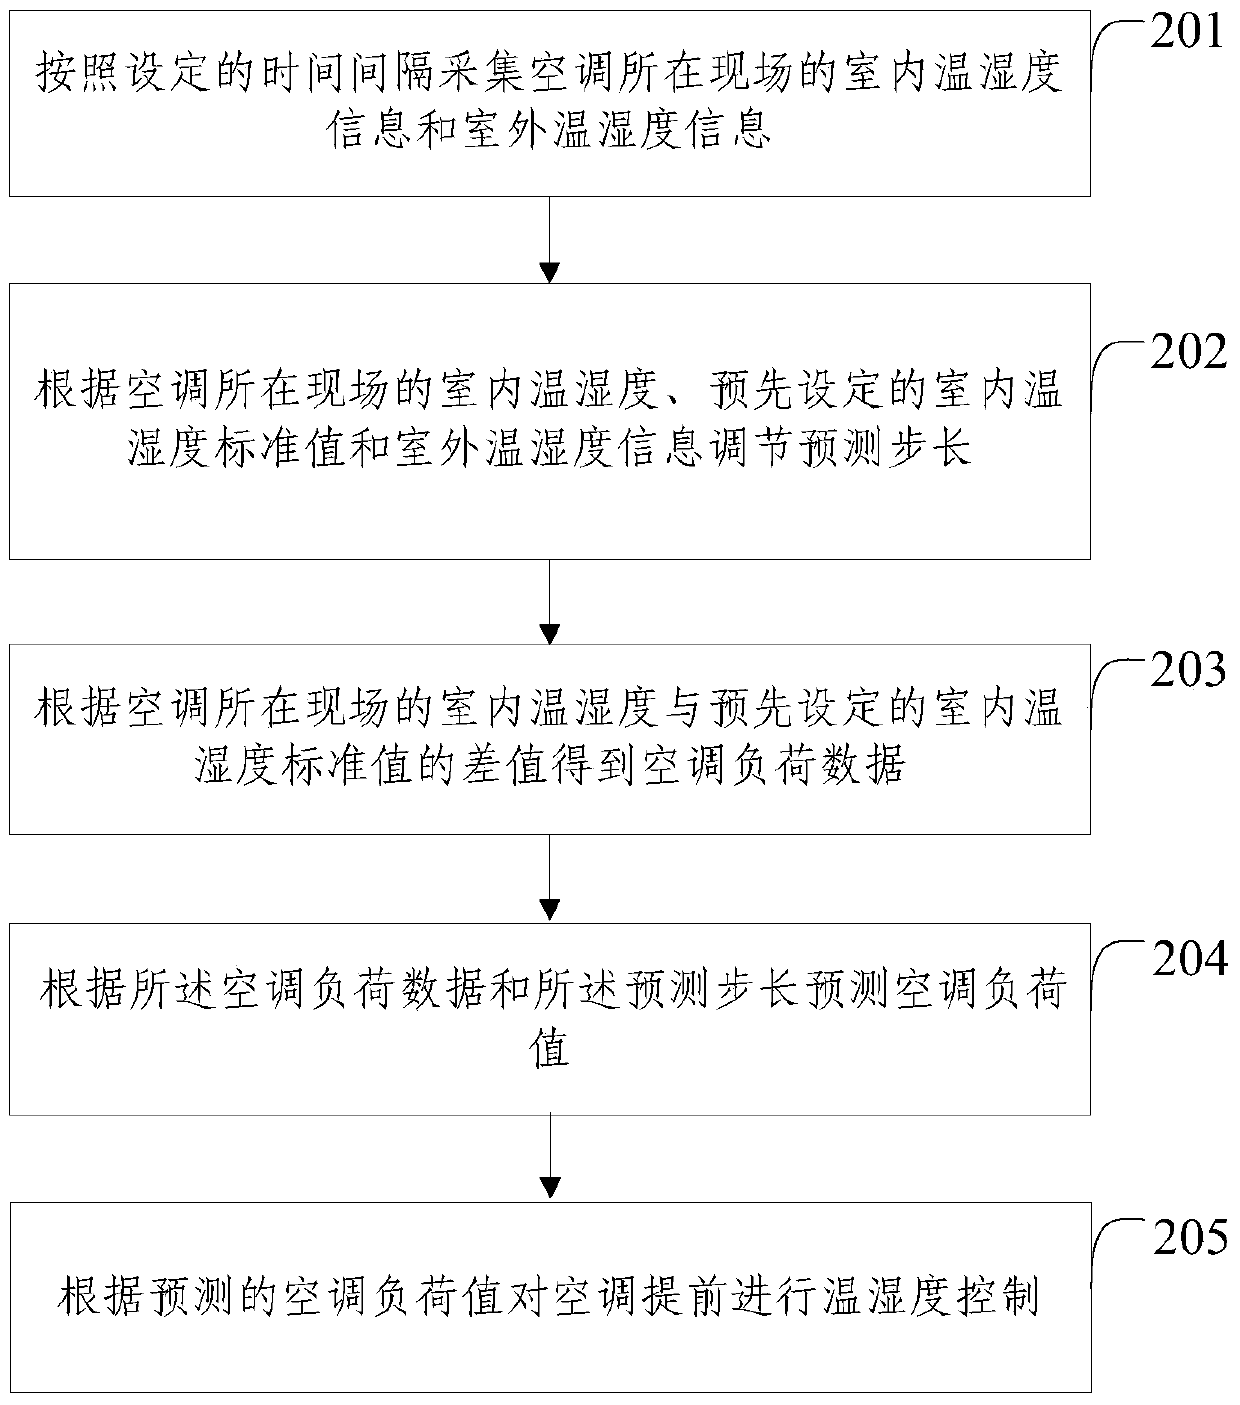 A control system and method based on air conditioning load forecasting